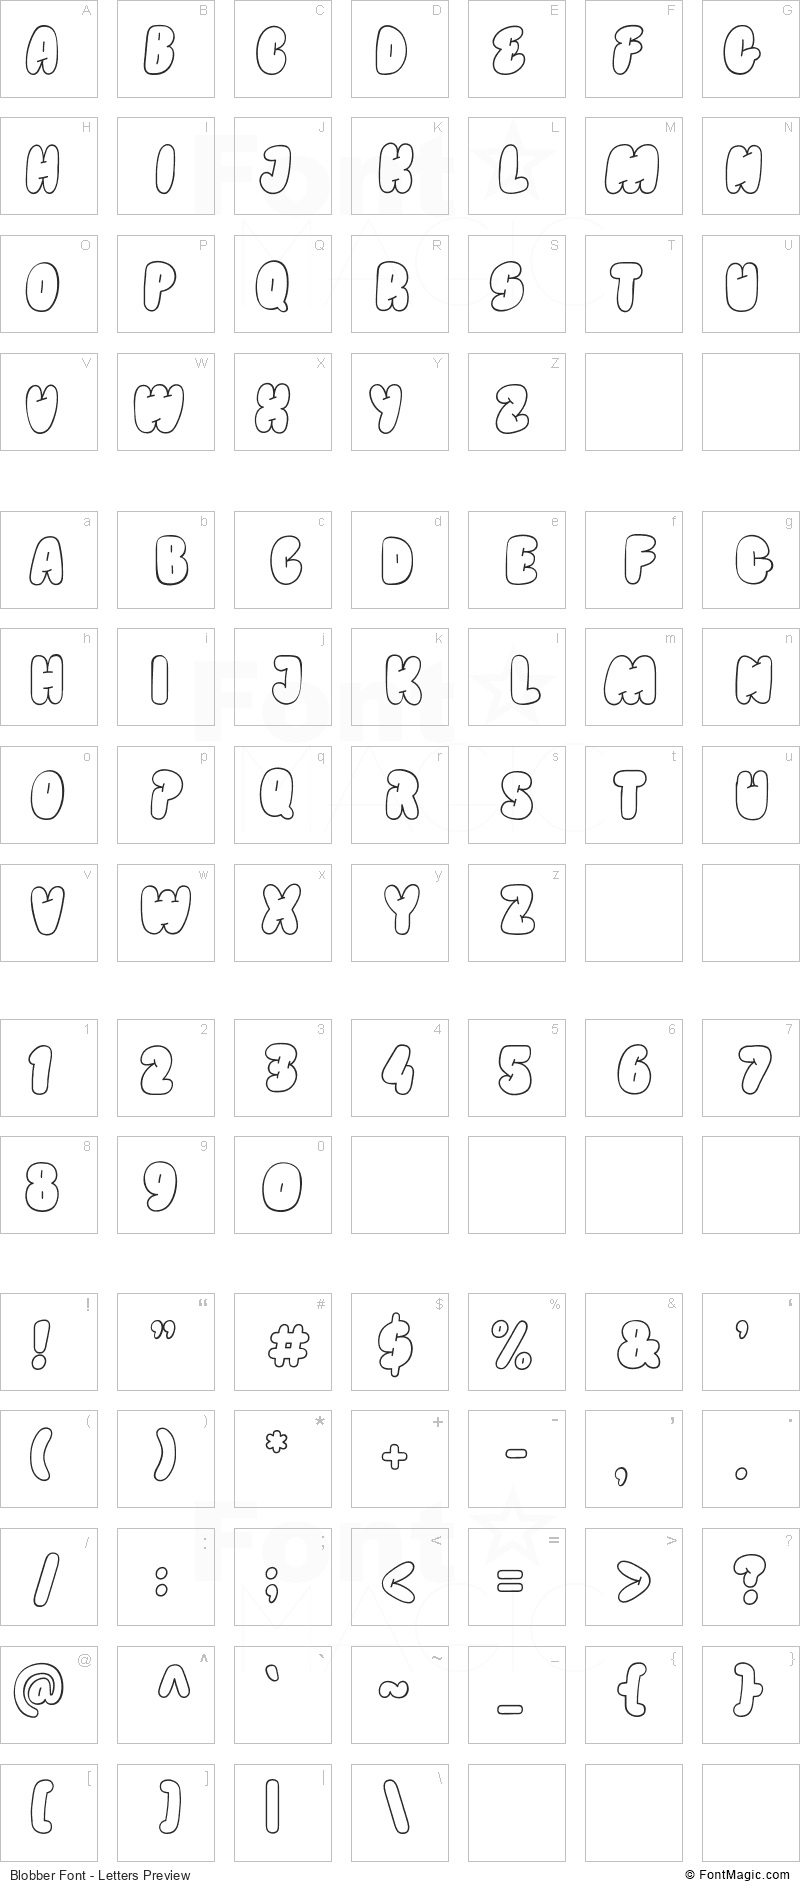 Blobber Font - All Latters Preview Chart